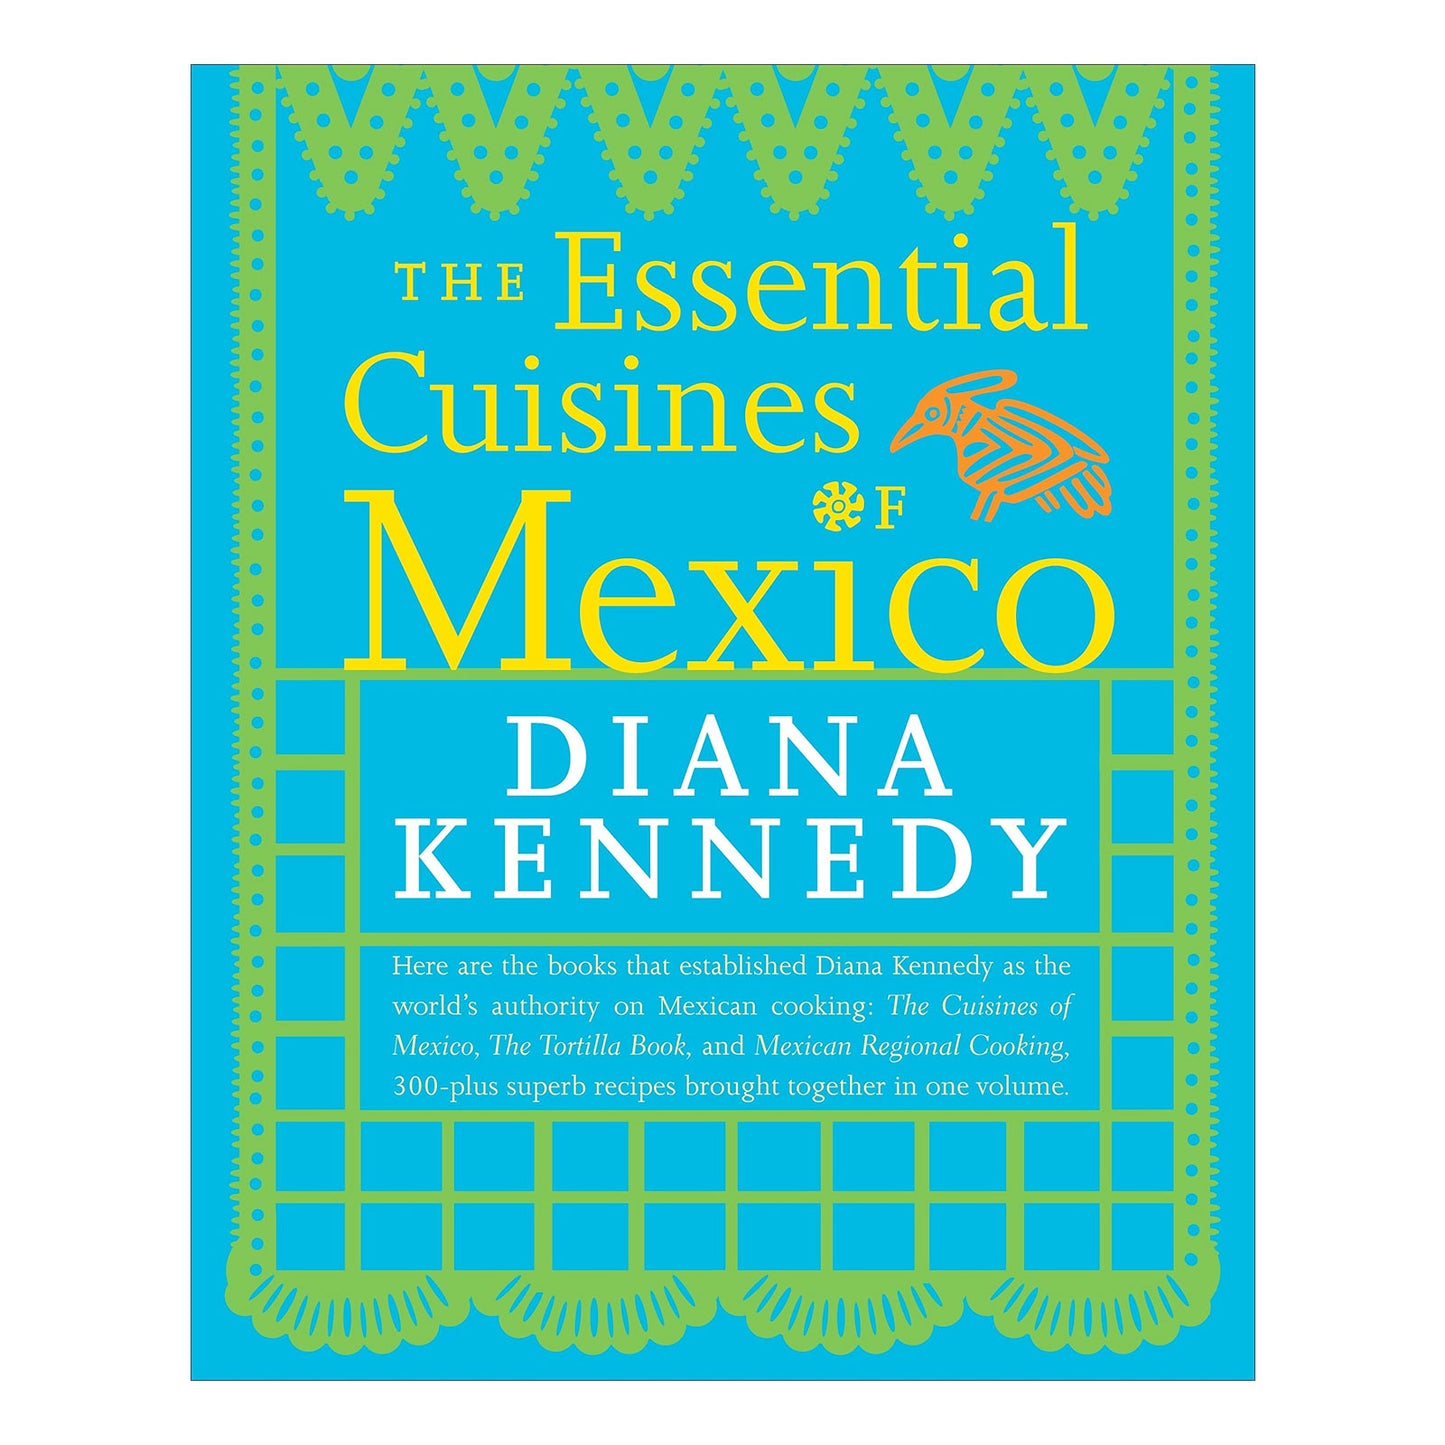 The Essential Cuisines of Mexico by Diana Kennedy